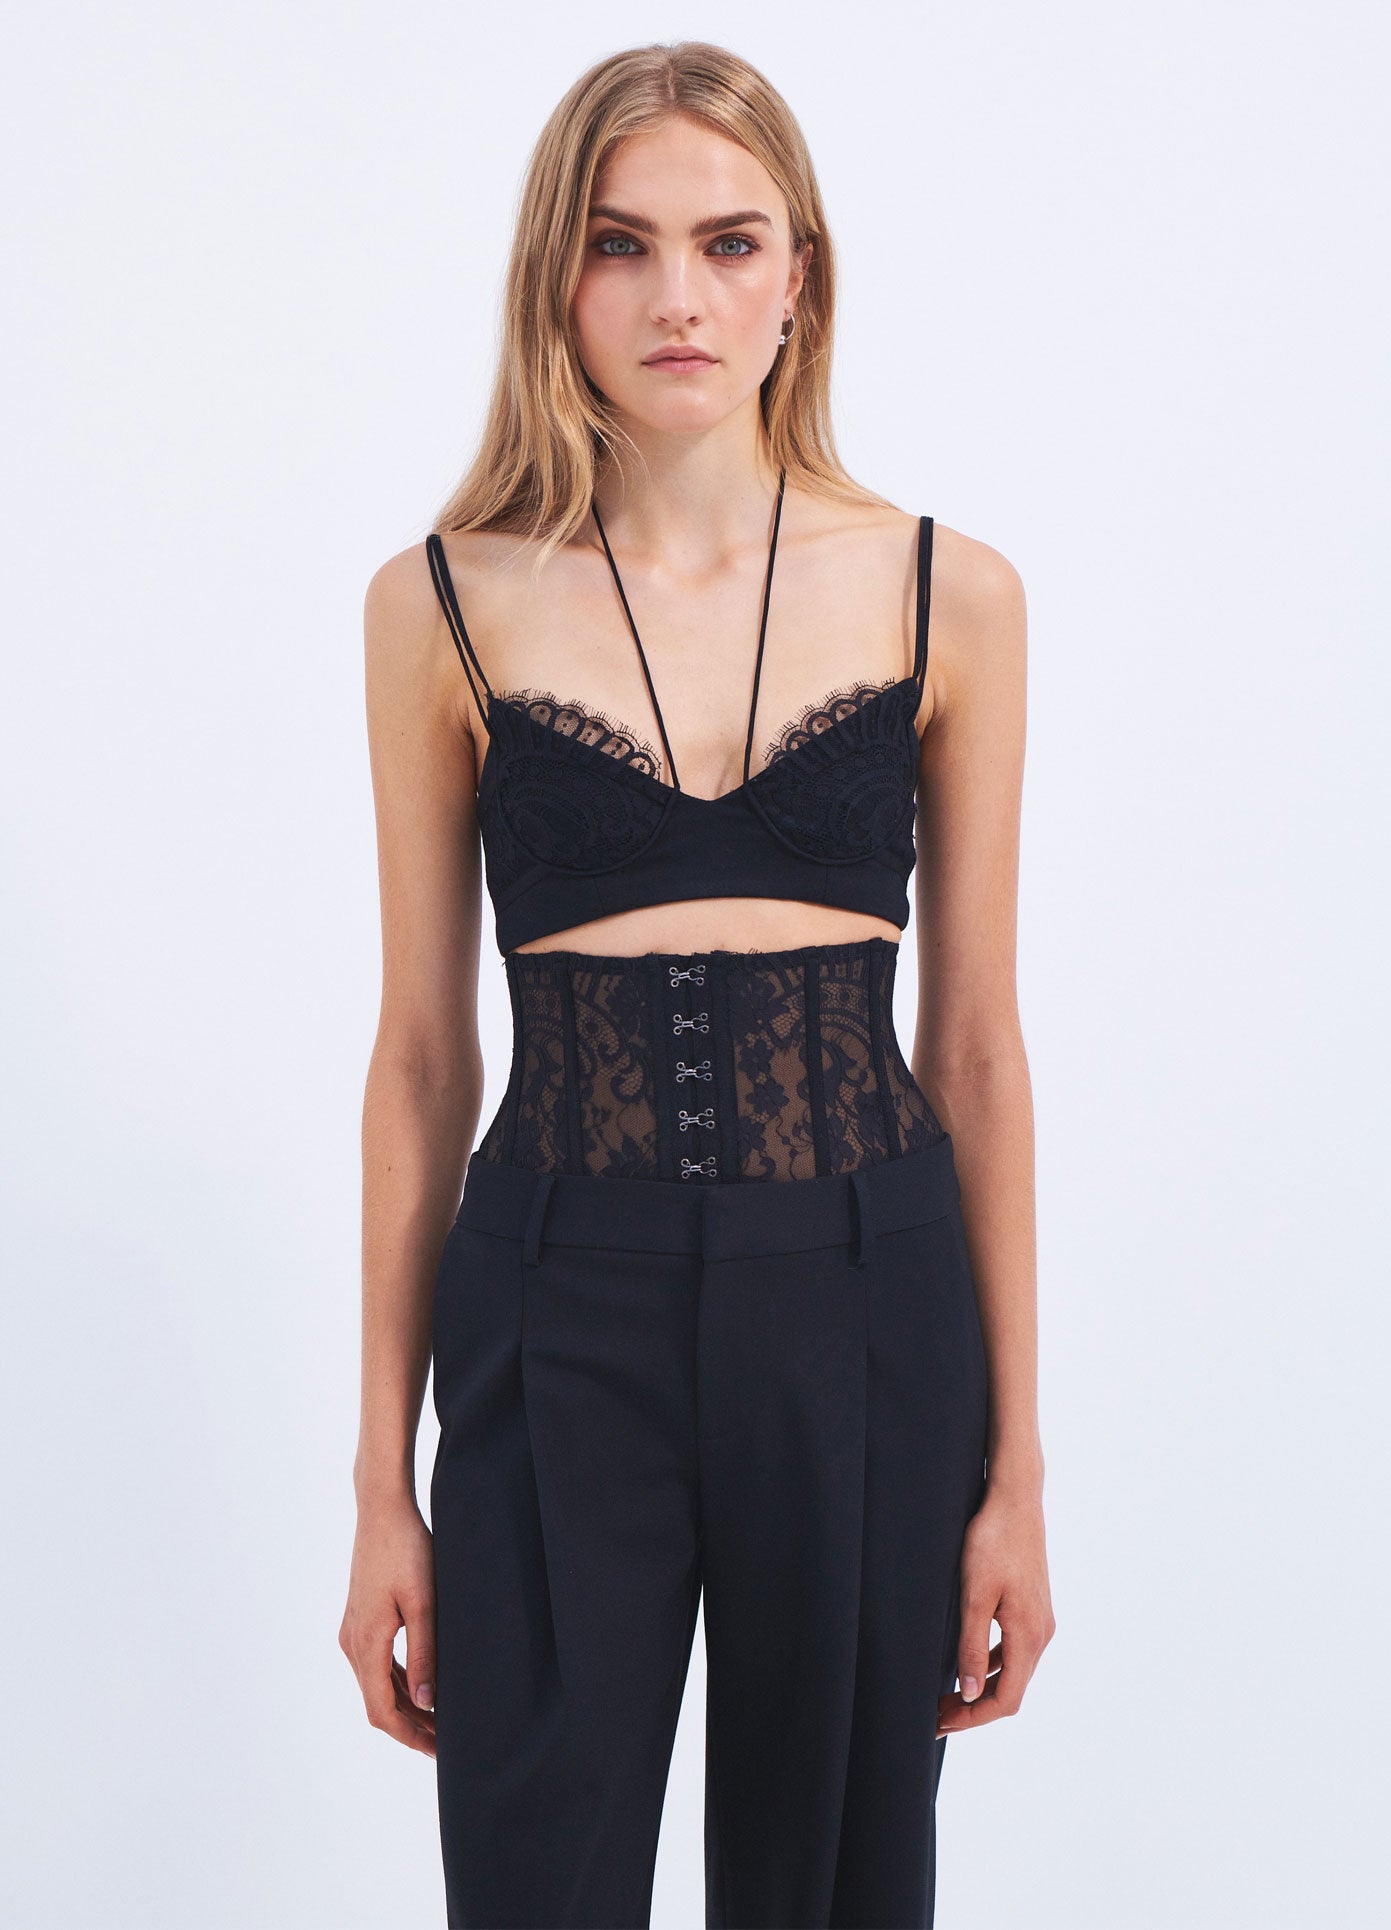 MONSE Spring 2024 Lace Bustier Trousers in Black on model front view